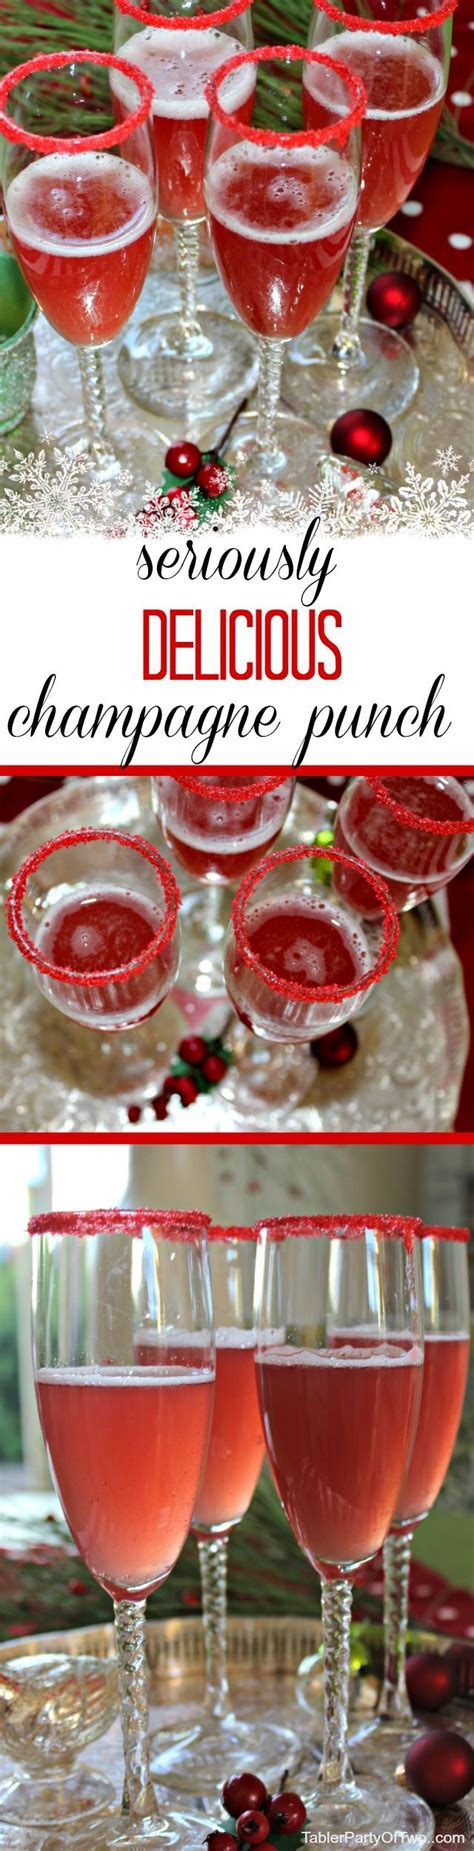 Champaign offers the best of urban life in a friendly, smaller city. Seriously Delicious Holiday Champagne Punch | Christmas drinks, Champagne punch, Alcoholic drinks